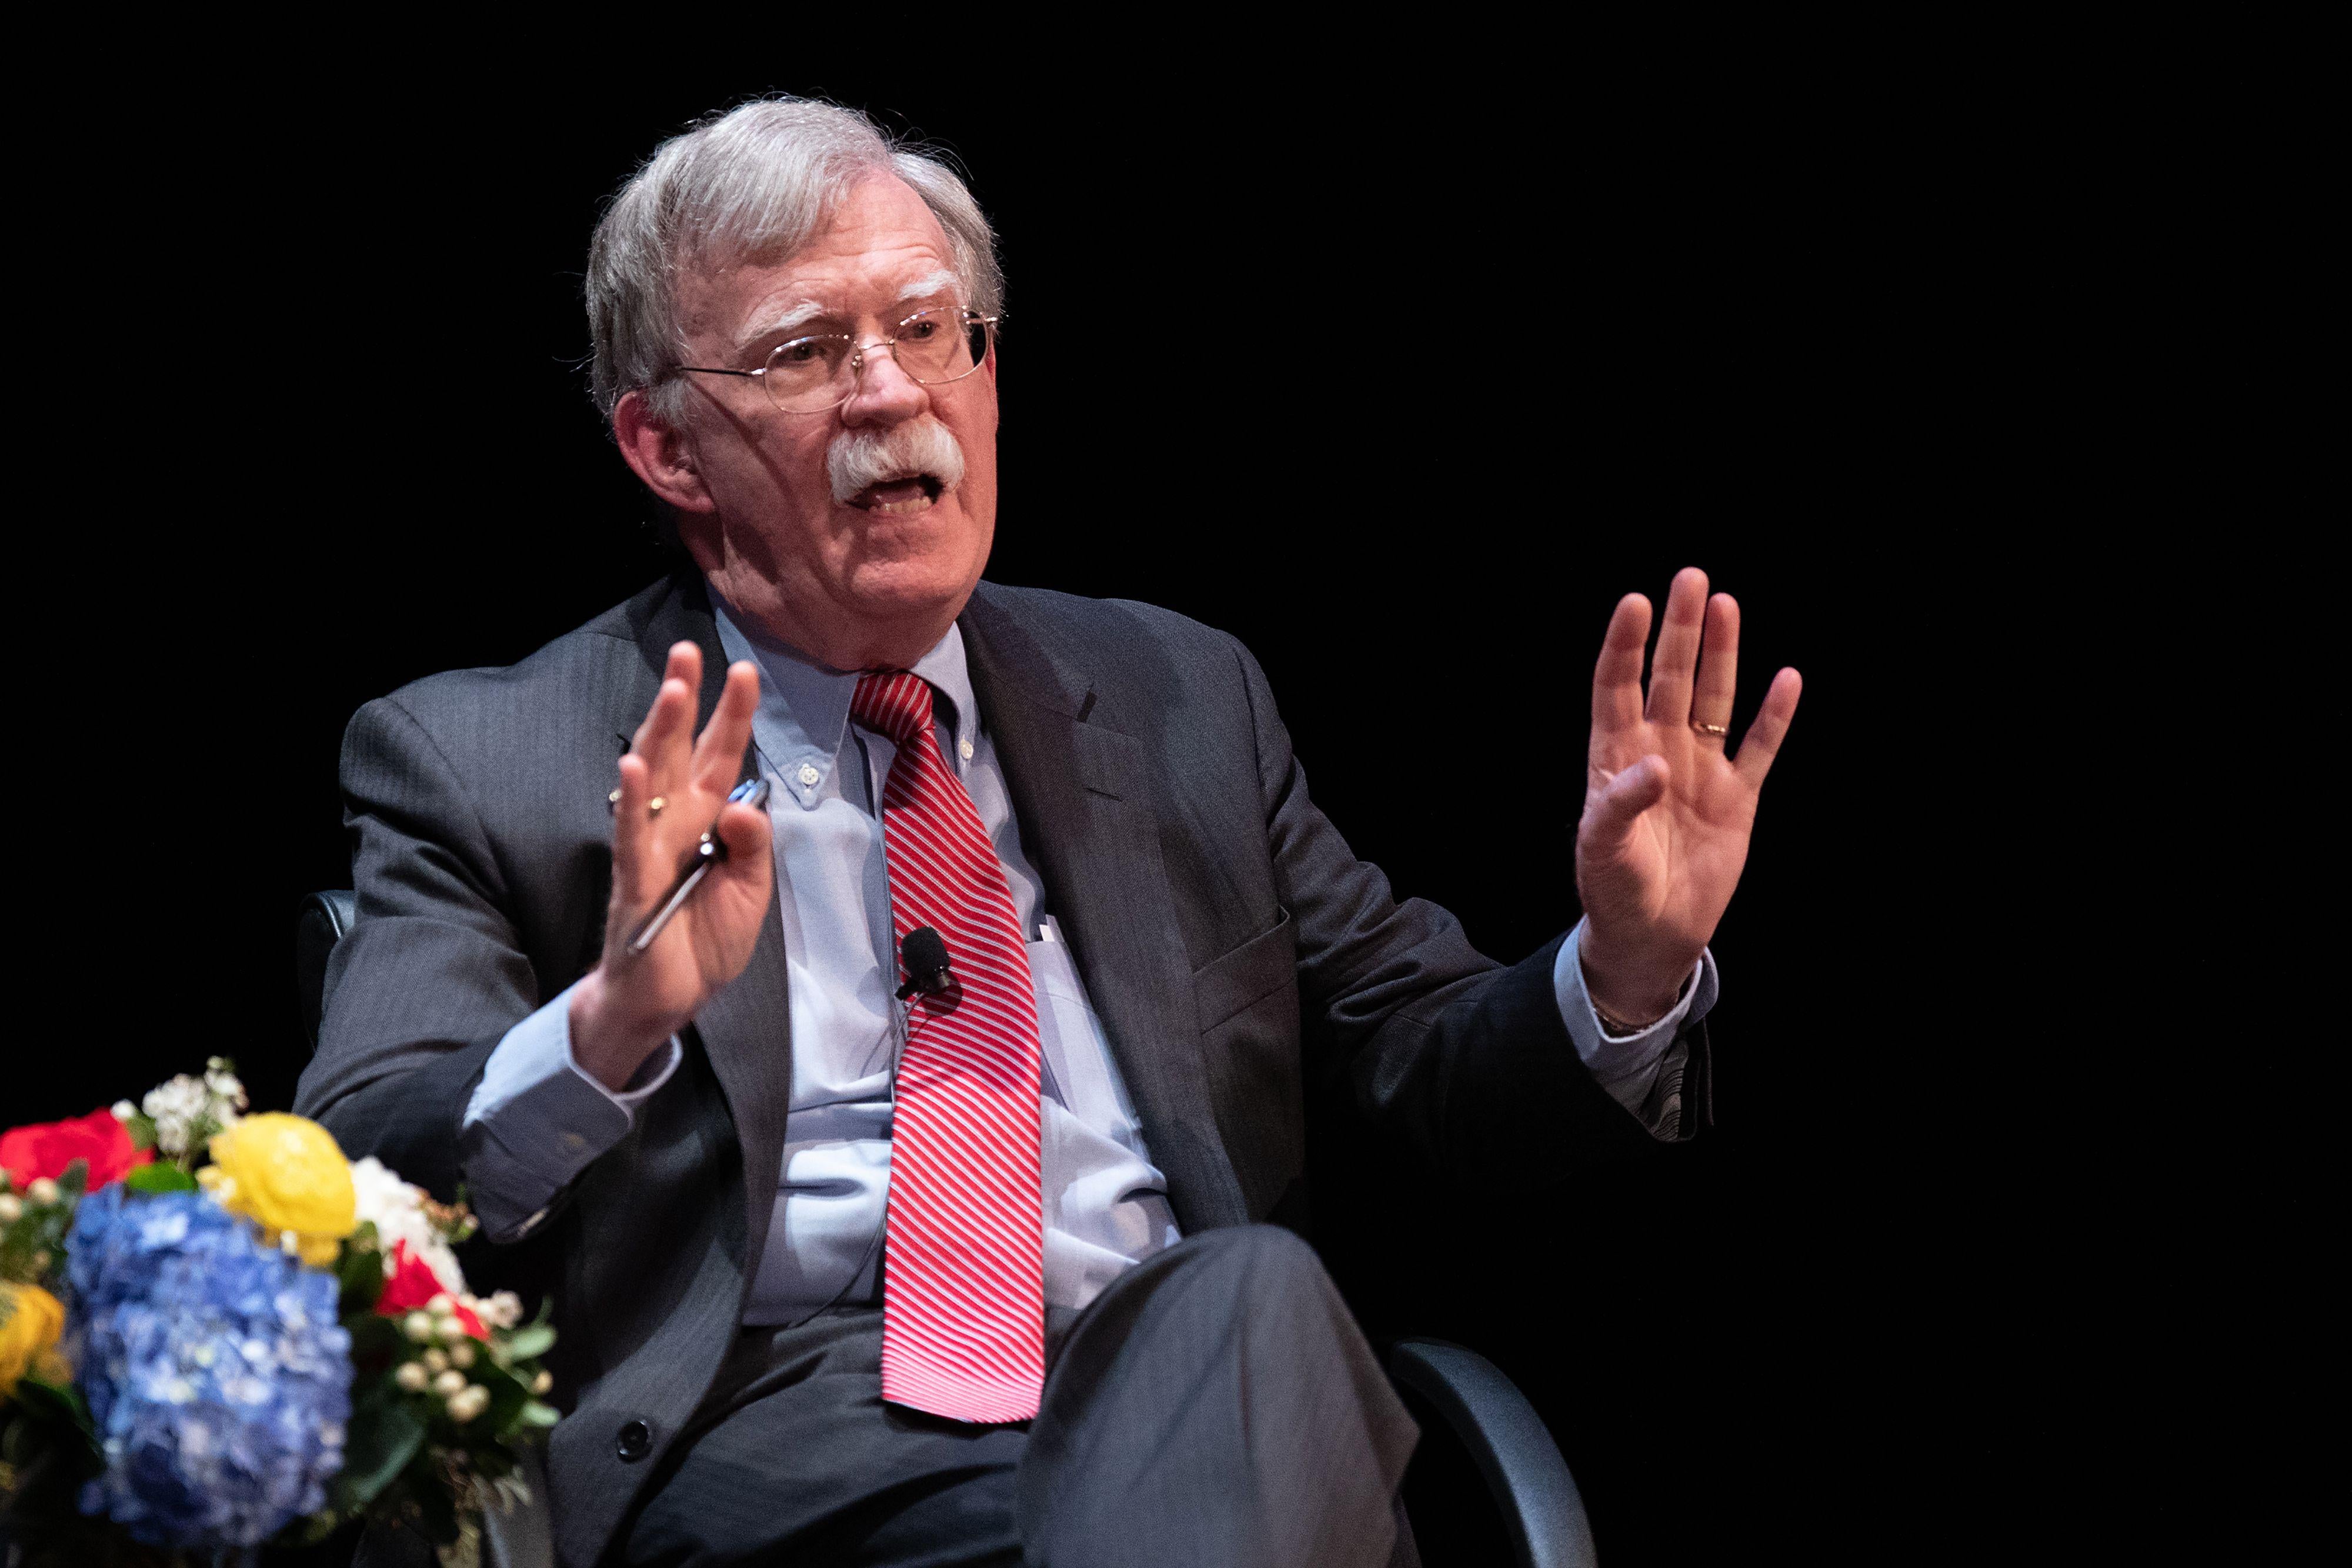 Bolton speaks while seated onstage.